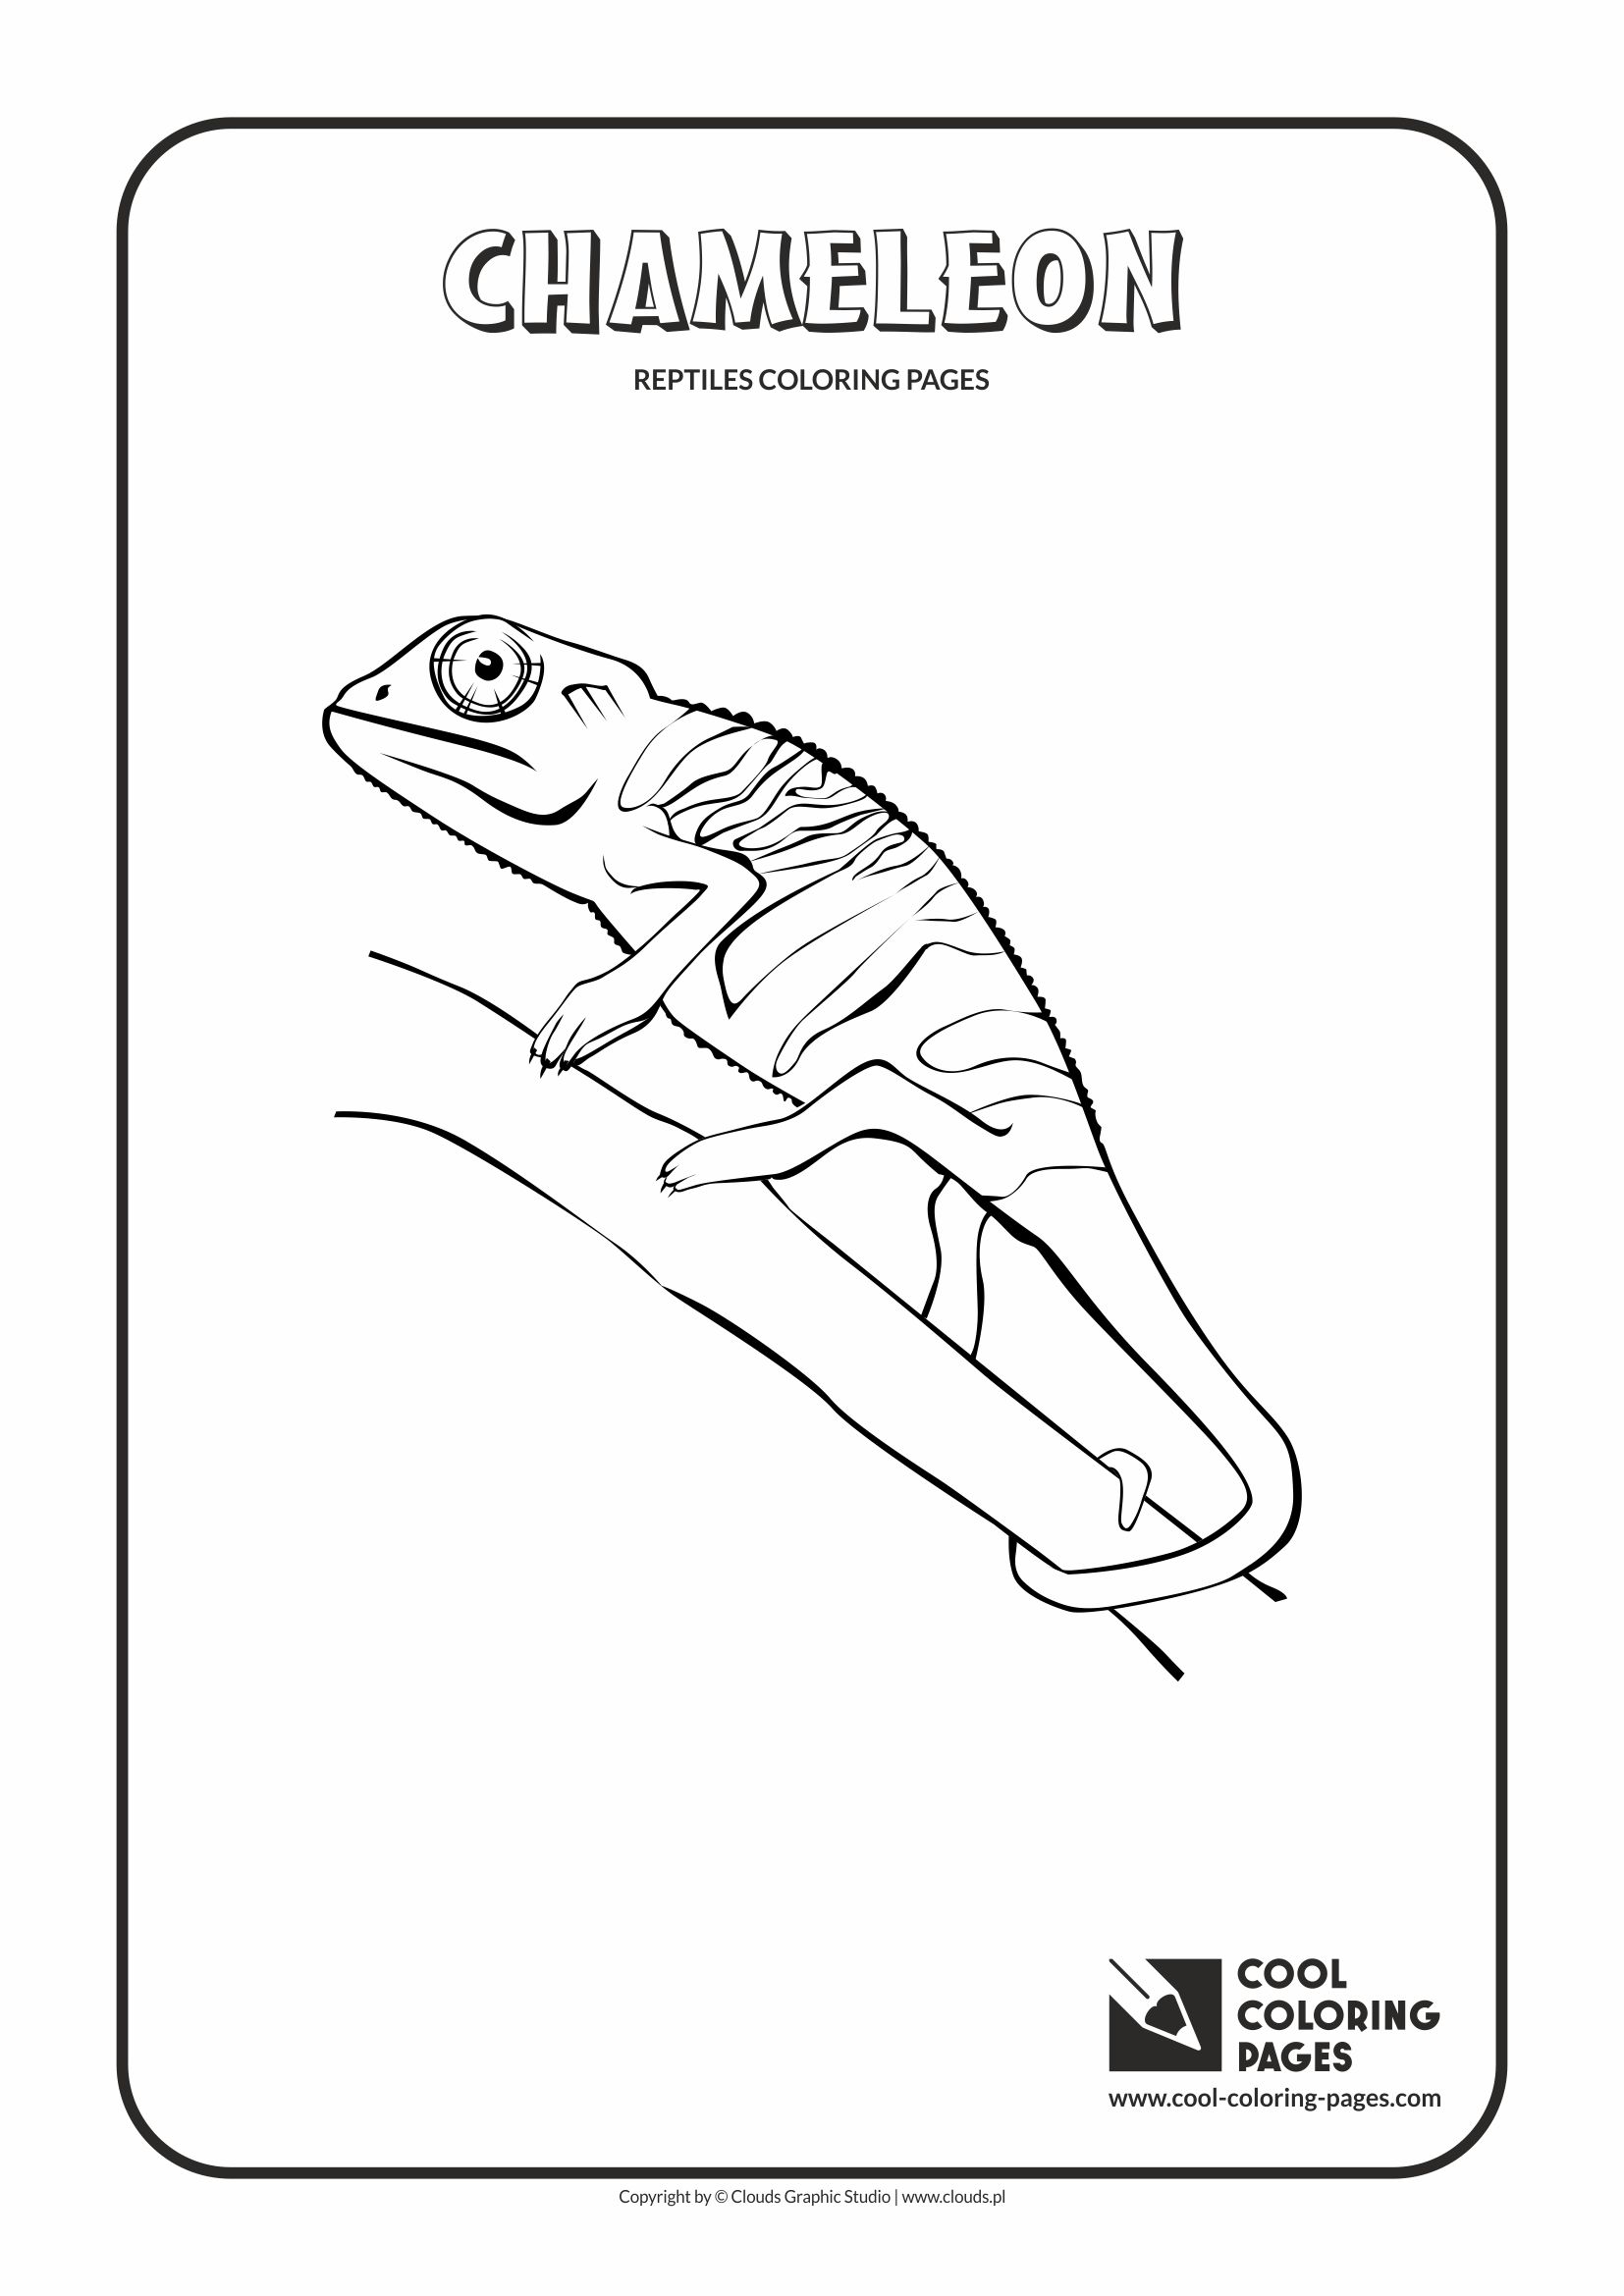 Cool Coloring Pages - Animals / Chameleon / Coloring page with chameleon